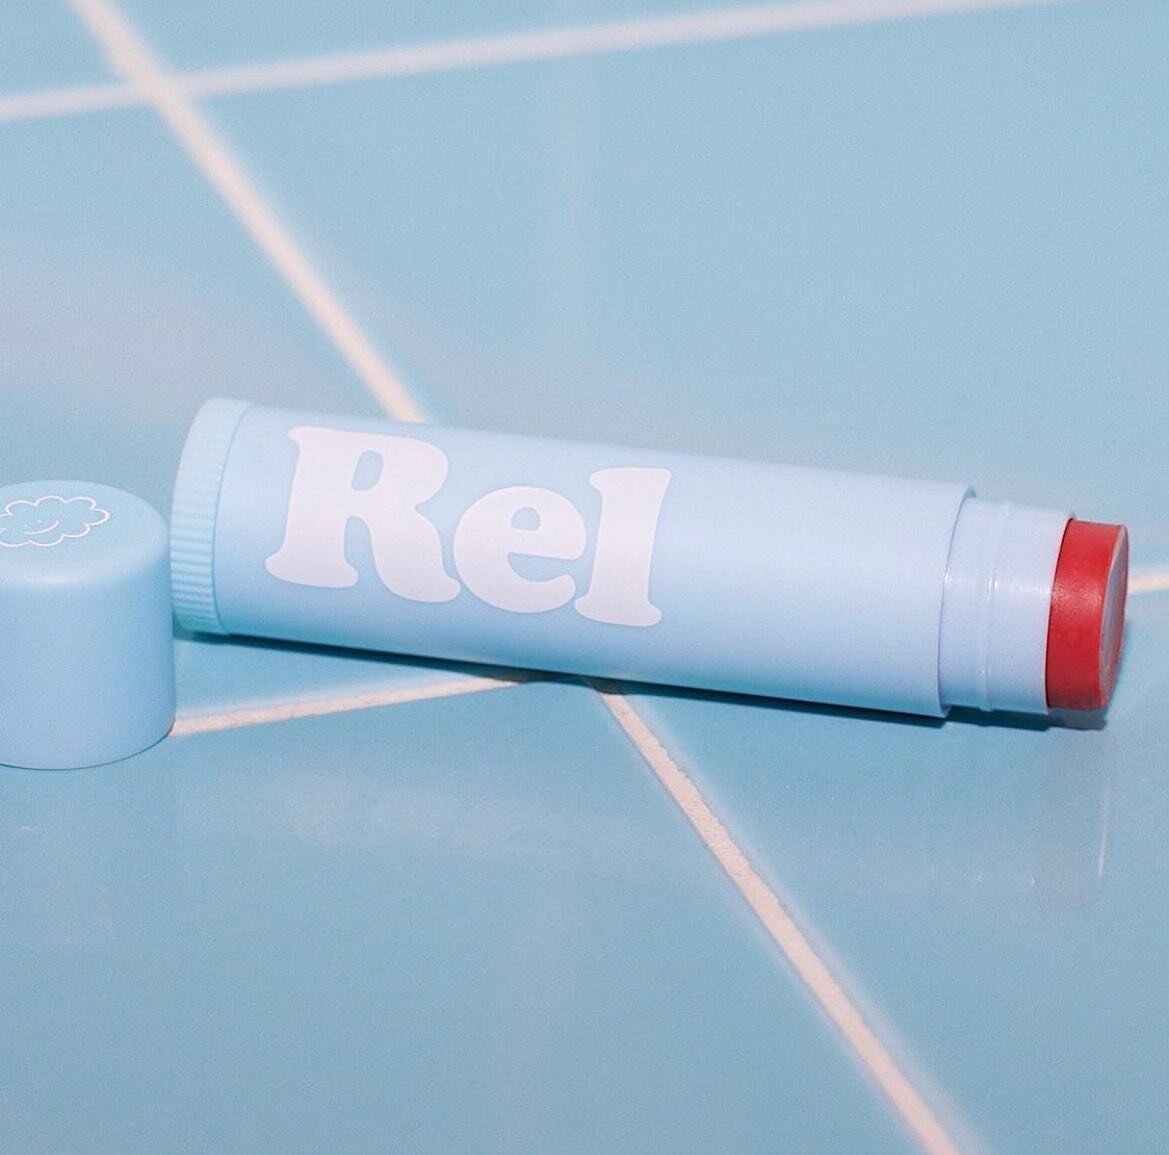 Keeping it Rel. The lip-balm.com (okay it&rsquo;s actually relbeauty.com)! Only the good stuff ingredients, vegan formula, environmentally friendly packaging&hellip;need we say more? Trust us, your lips will thank you later 😘

📷: @relbeauty